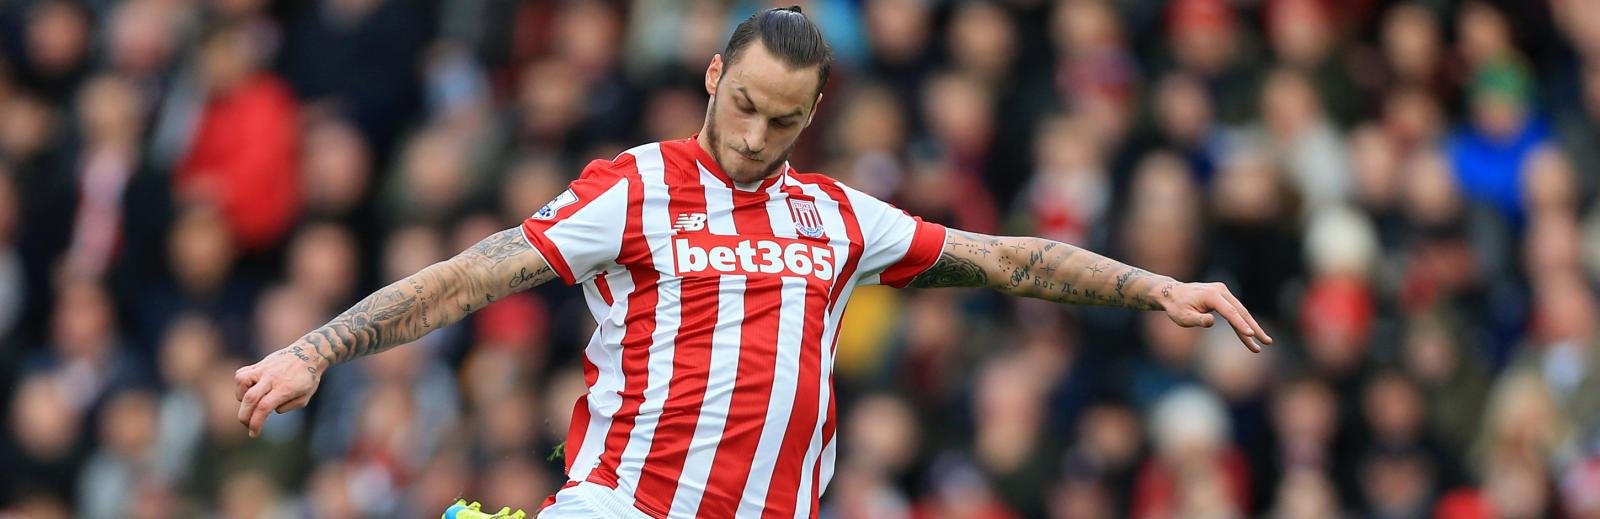 Everton target Marko Arnautovic signs new four-year deal at Stoke City